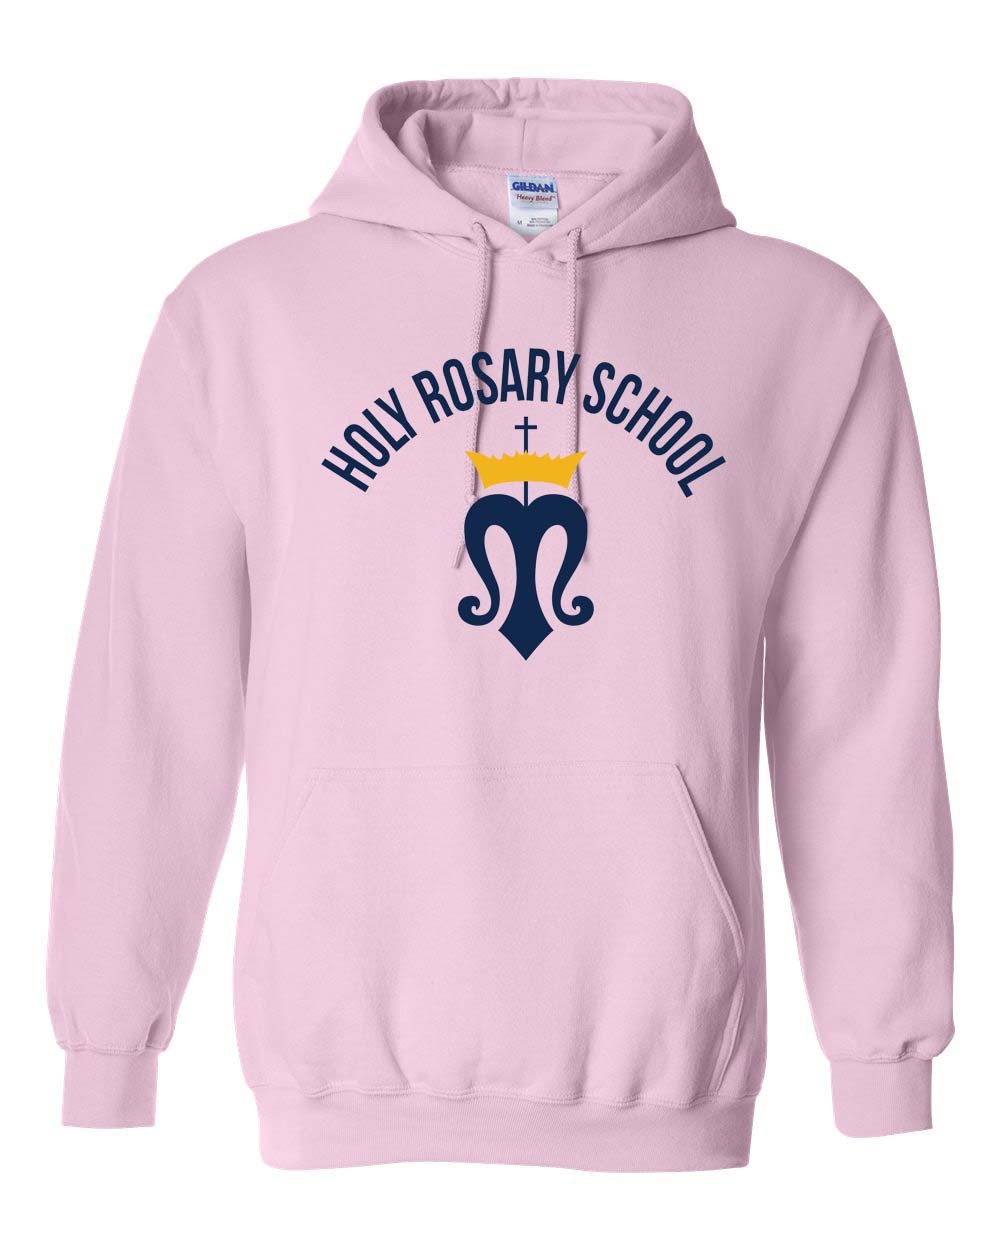 HRS Spirit Pullover Hoodie w/ Navy Logo - Please Allow 2-3 Weeks for Delivery